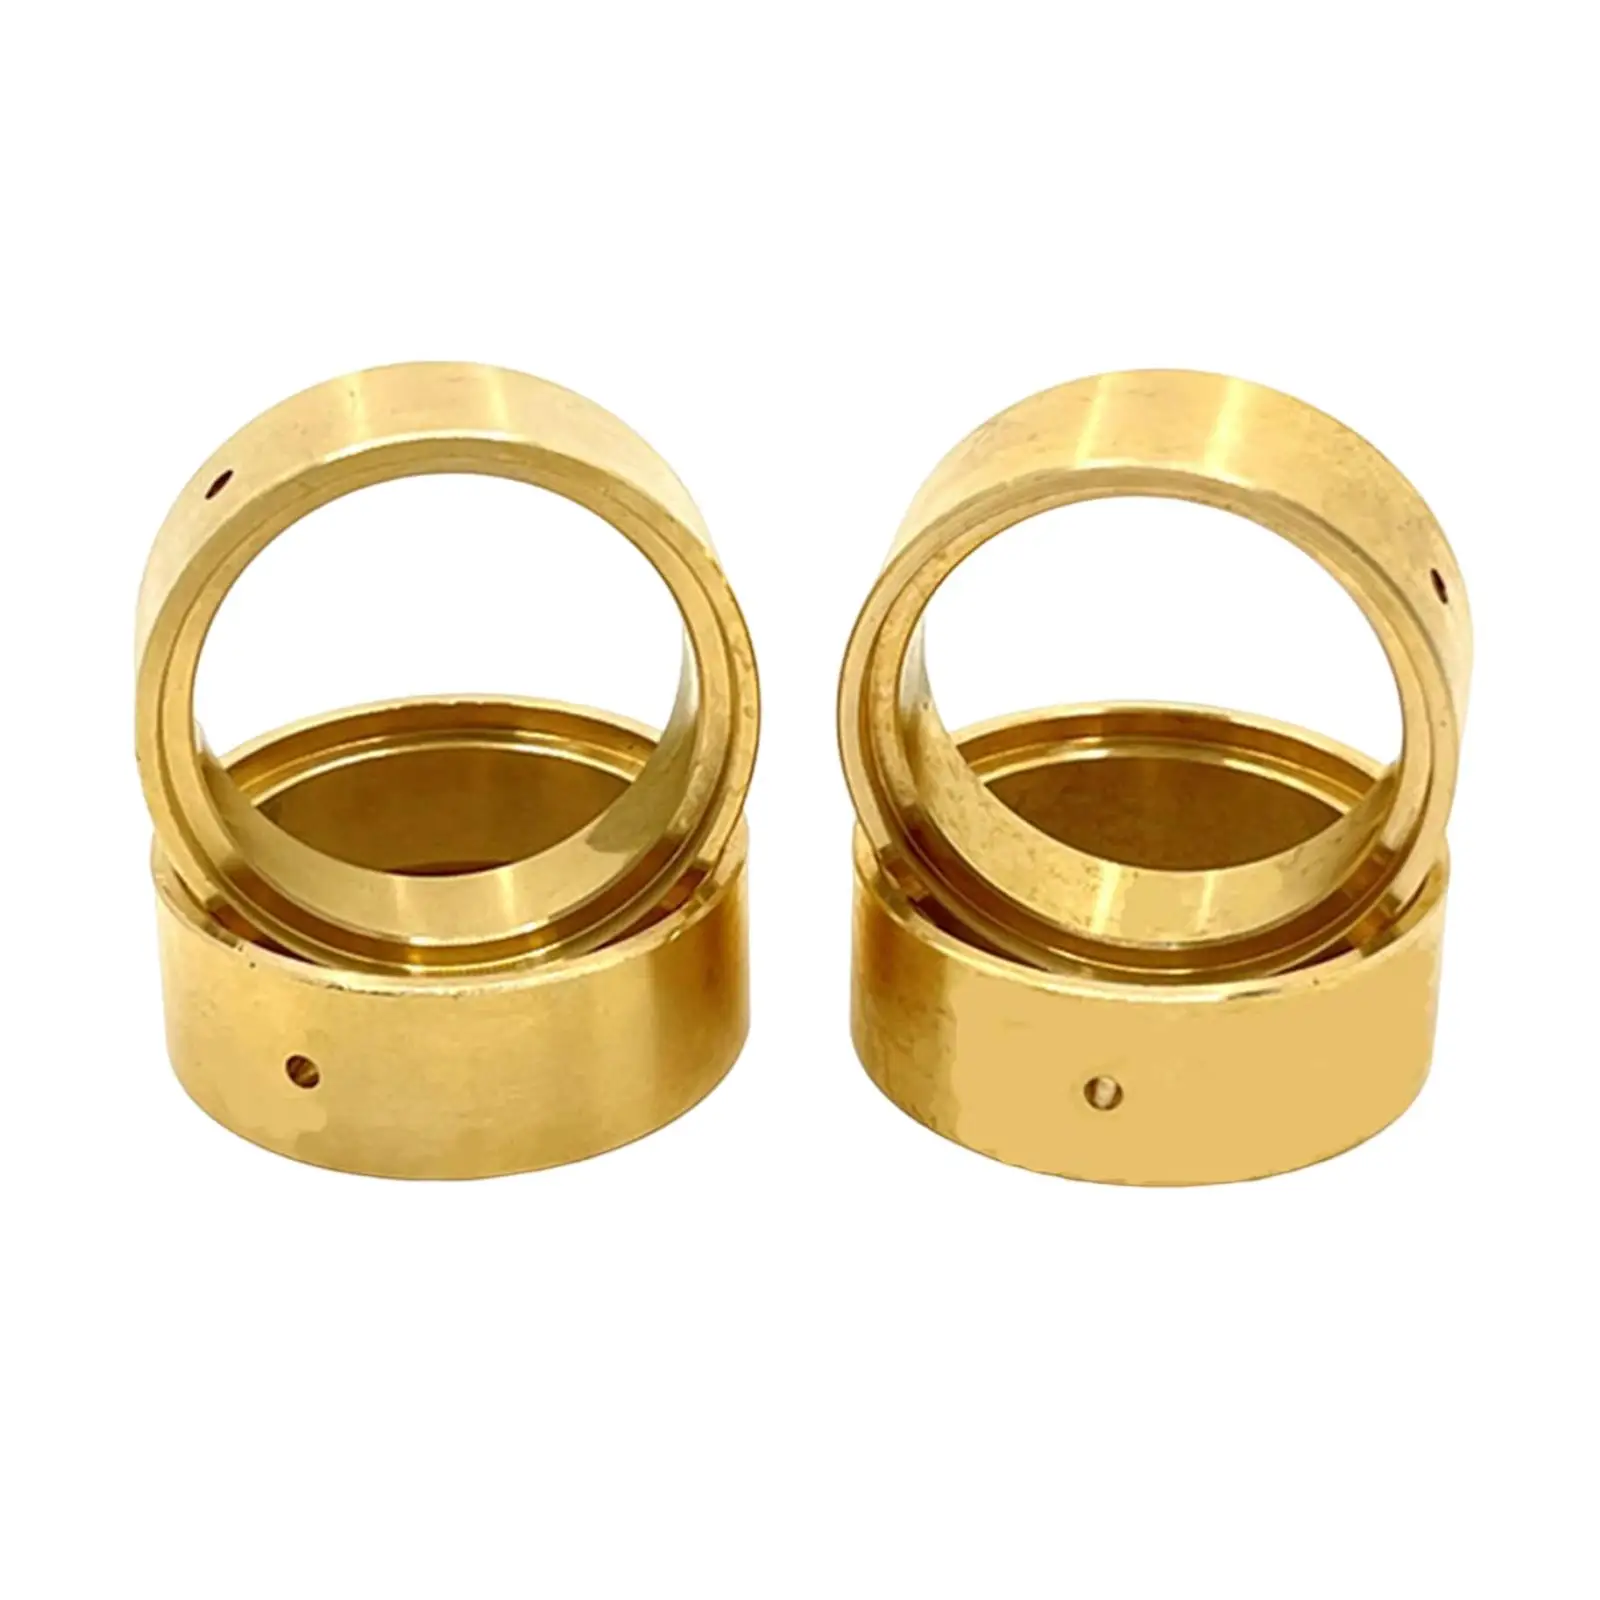 1:24Scale RC Brass Wheel Weights Wheel Rims Hubs Counterweight for Fcx24 Hobby Car Model Buggy Vehicles DIY Accessories